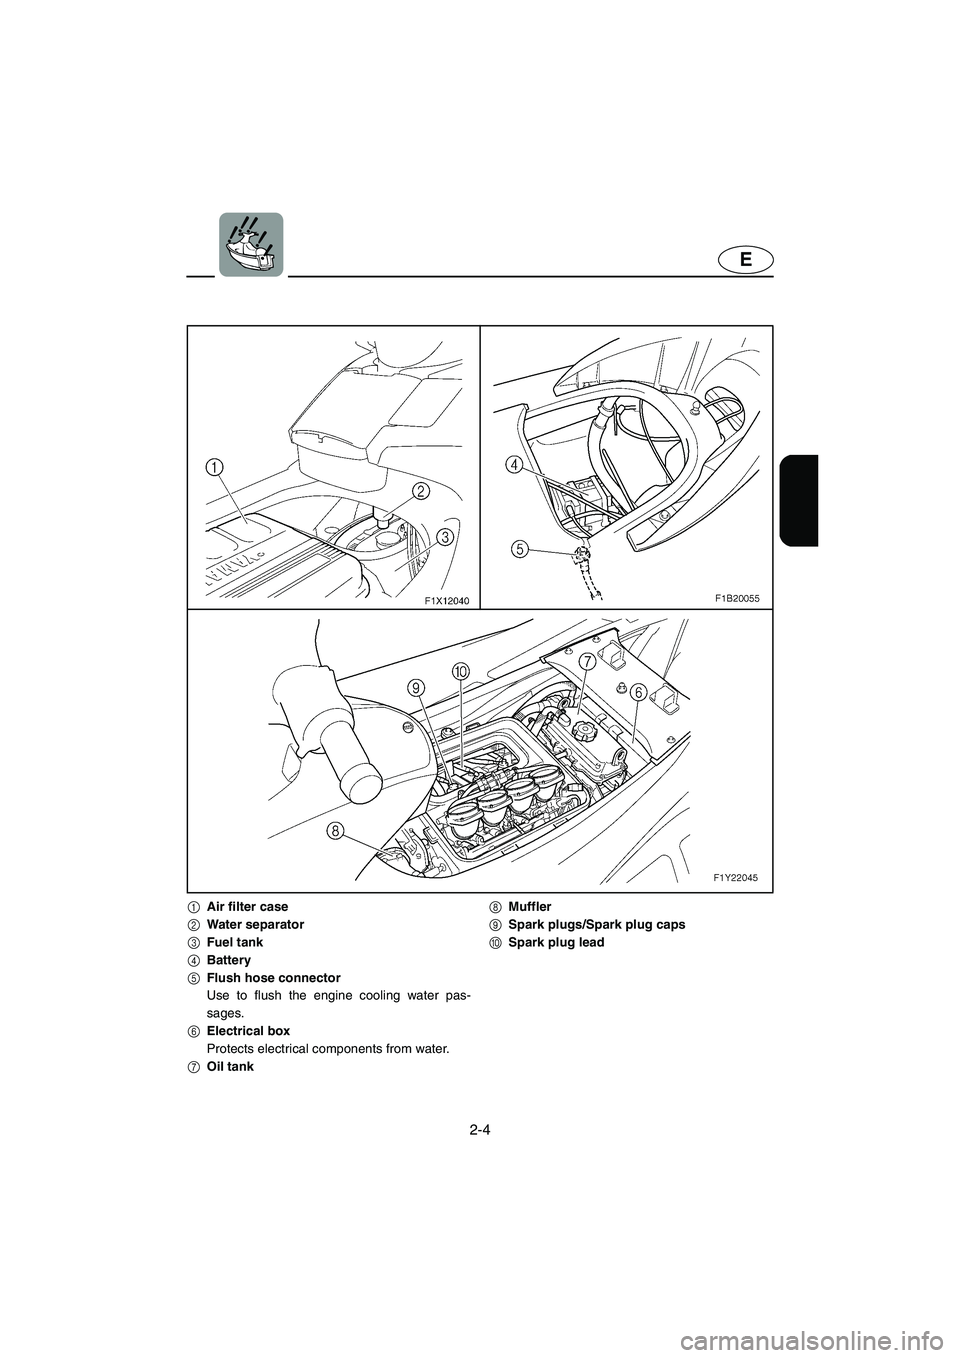 YAMAHA FX 2006  Owners Manual 2-4
E
1Air filter case
2Water separator
3Fuel tank
4Battery
5Flush hose connector
Use to flush the engine cooling water pas-
sages.
6Electrical box
Protects electrical components from water.
7Oil tank